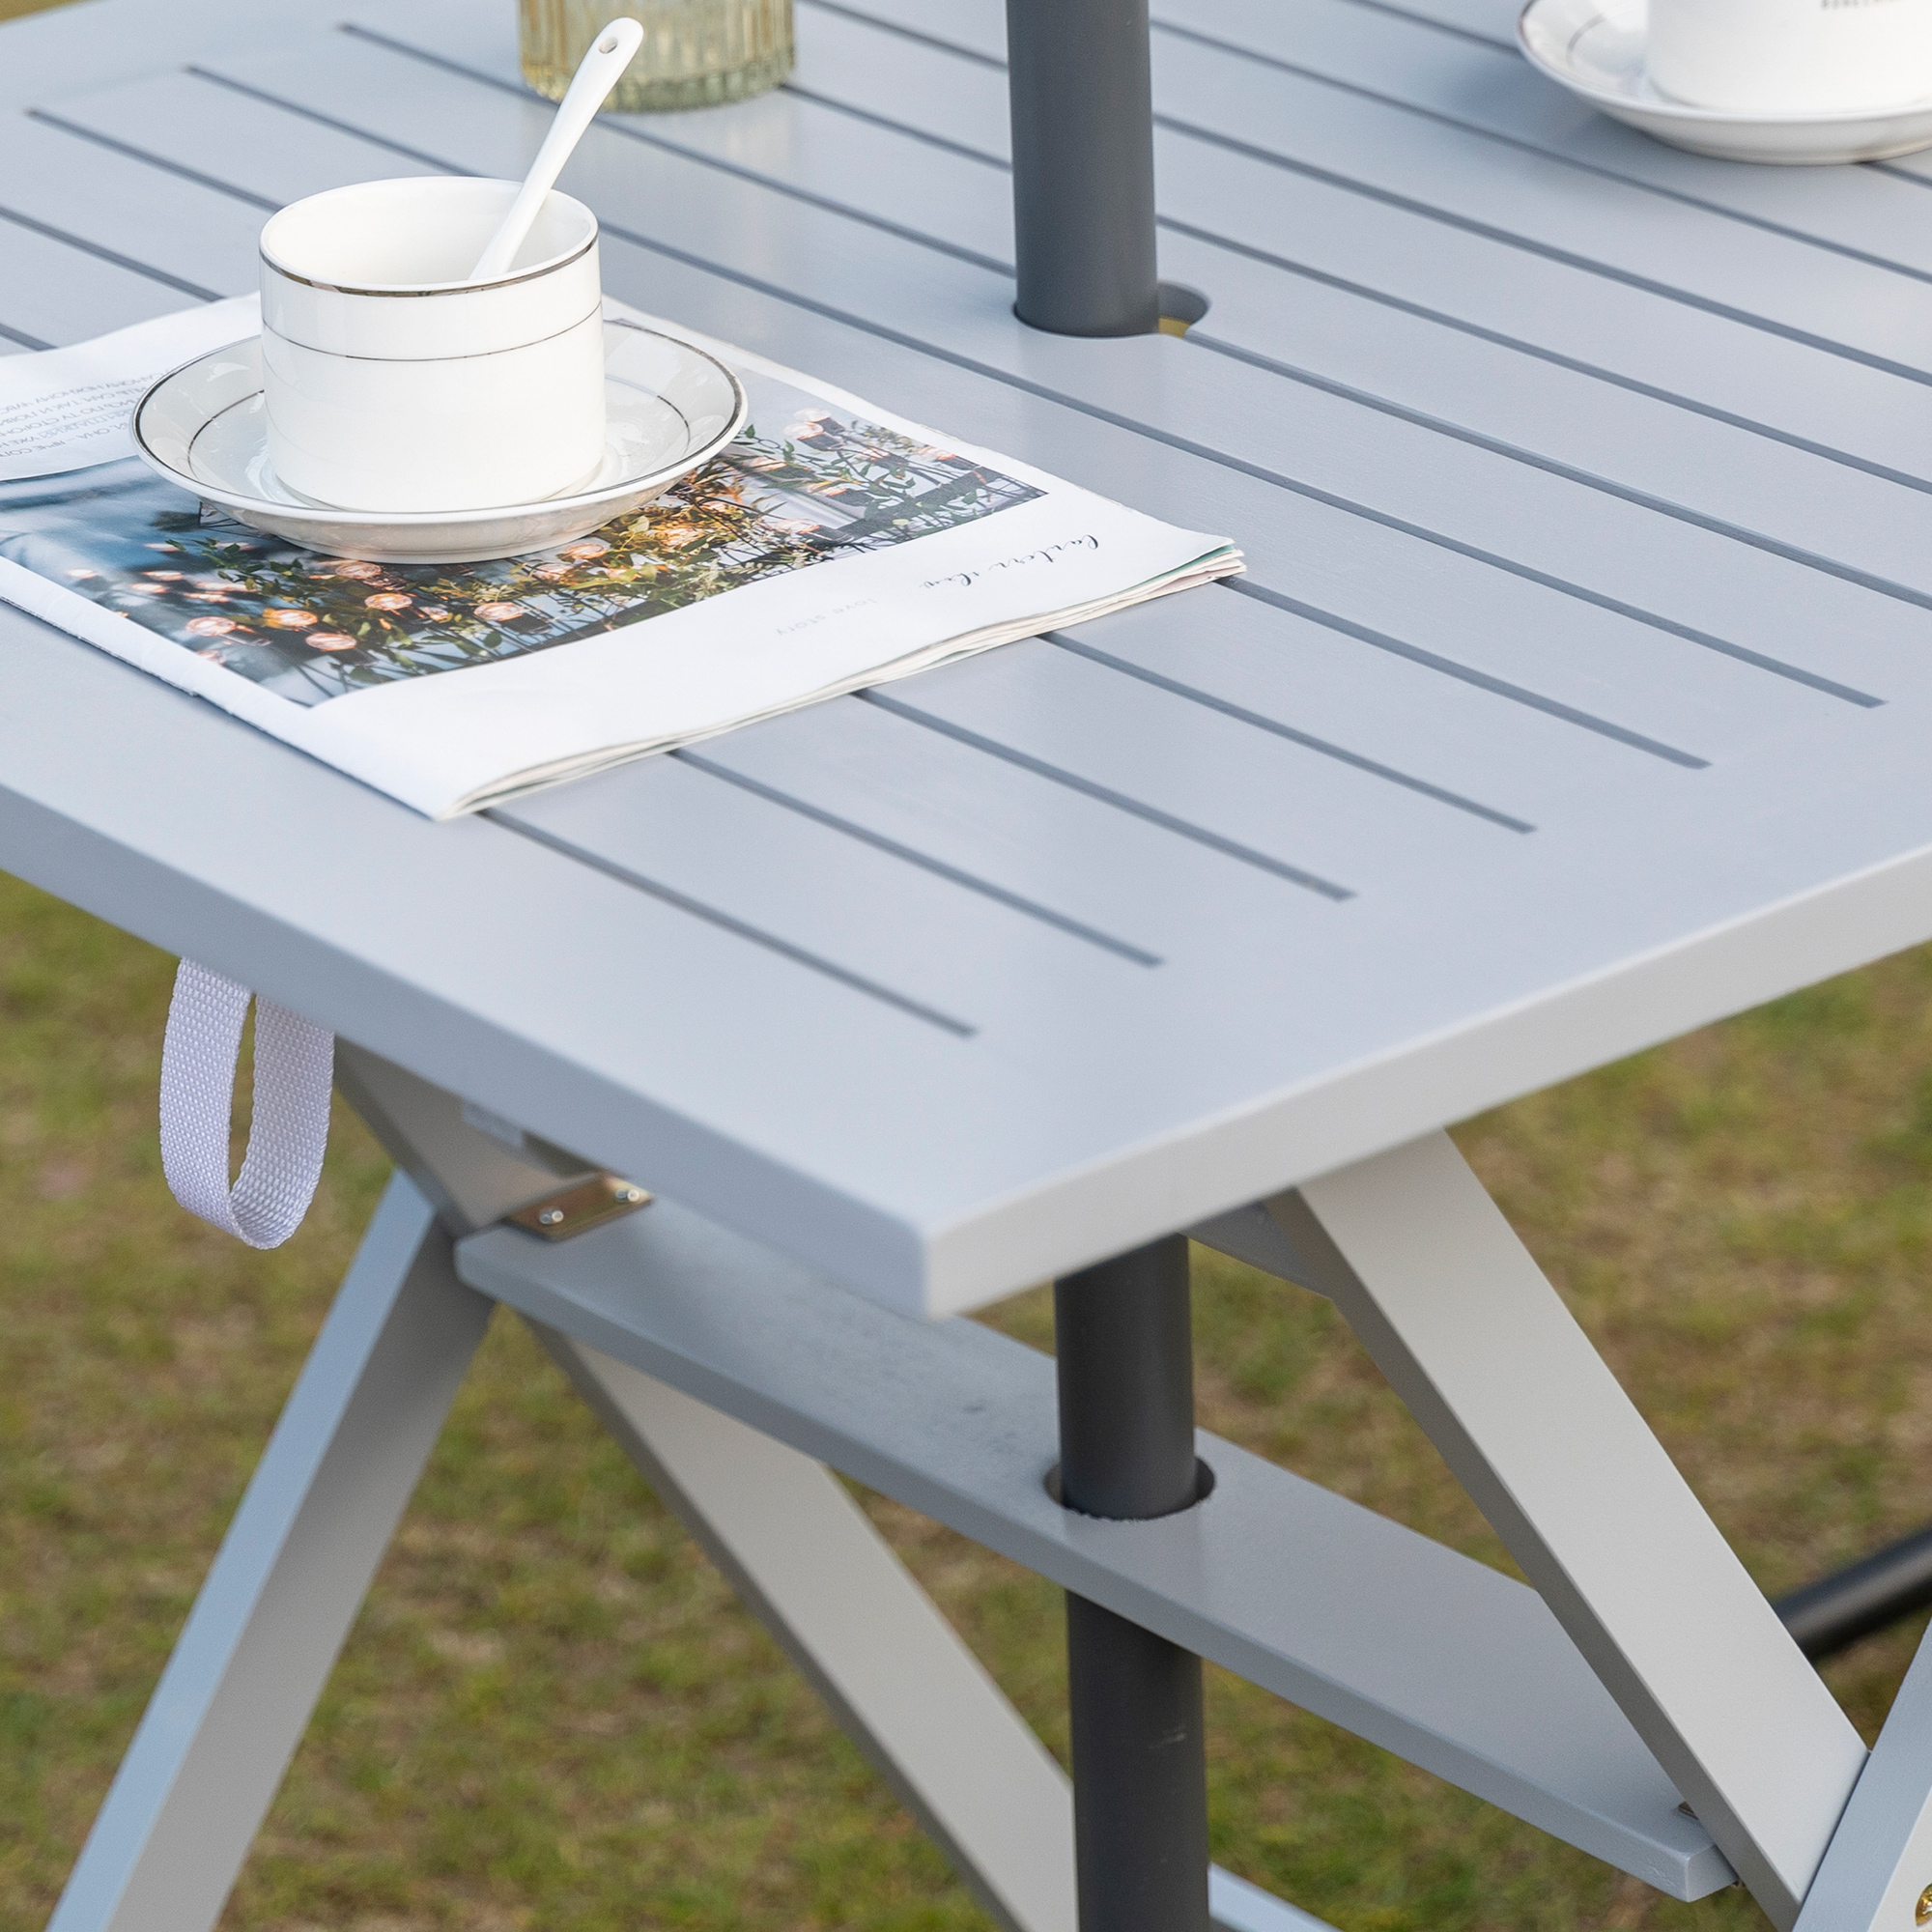 Outsunny Foldable Dining Table, Square Wood Side Table, Gray - image 4 of 9